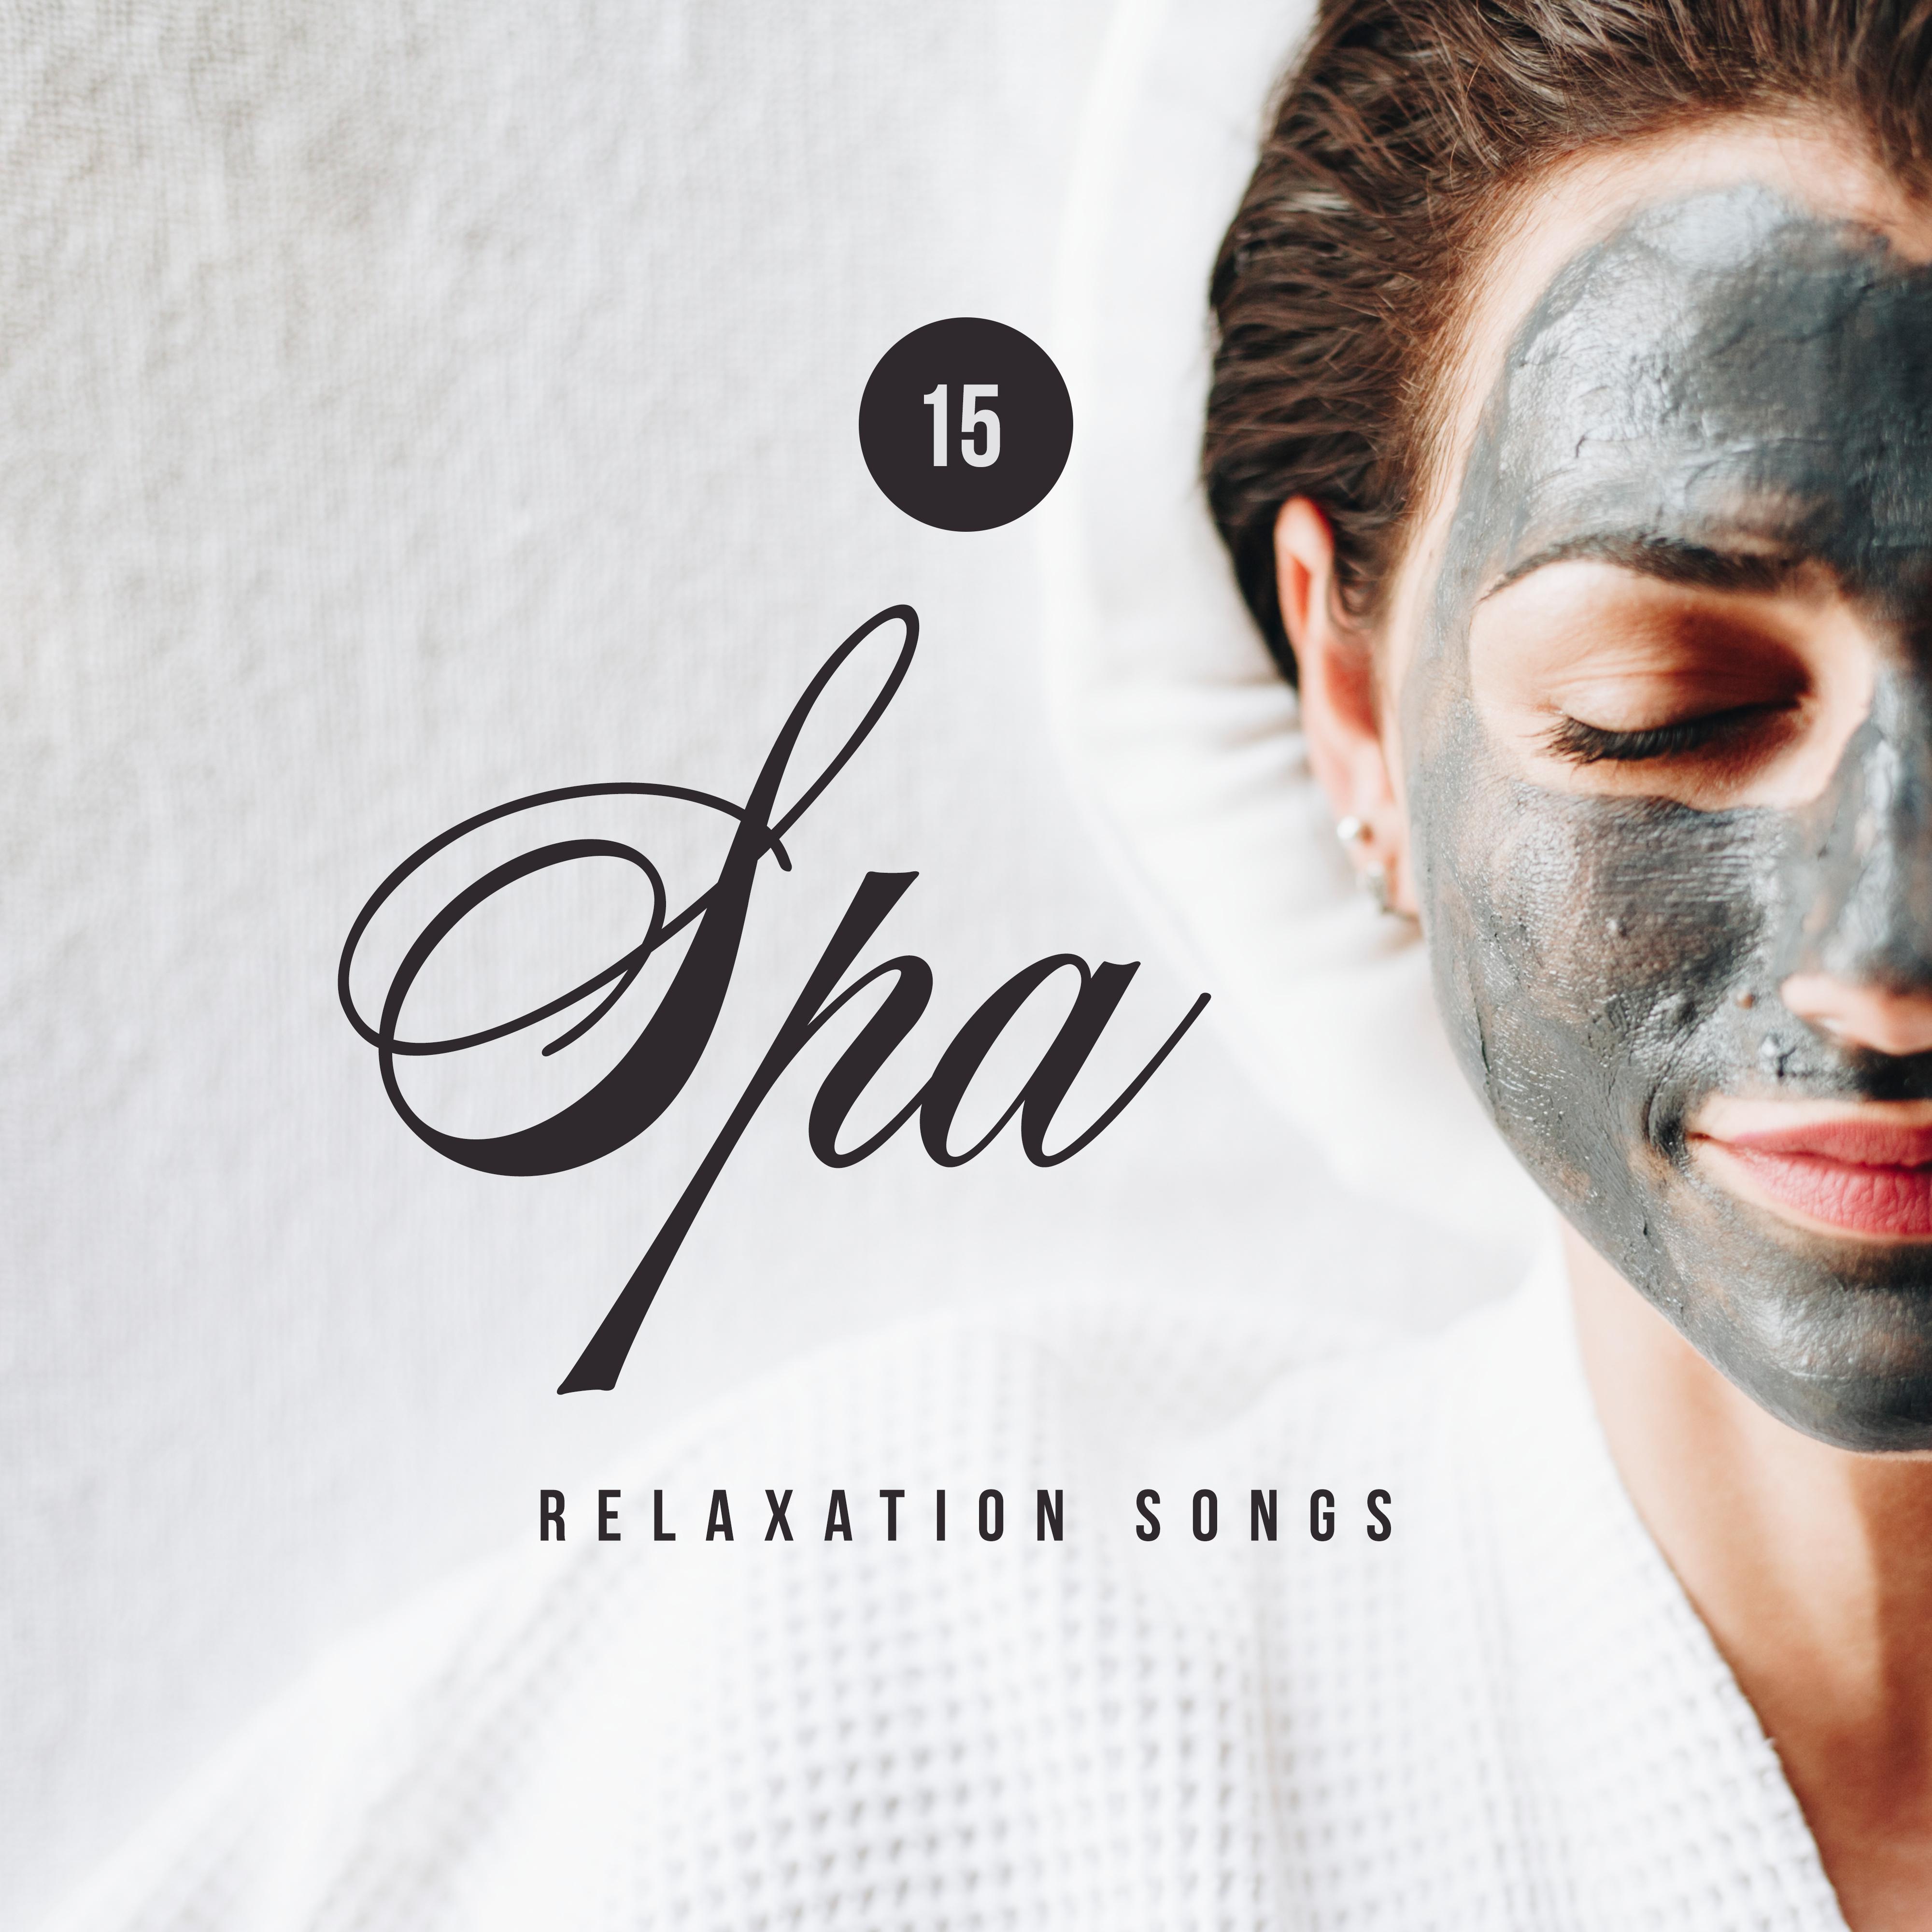 15 Spa Relaxation Songs: New Age Music for Perfect Massage & Wellness Experience